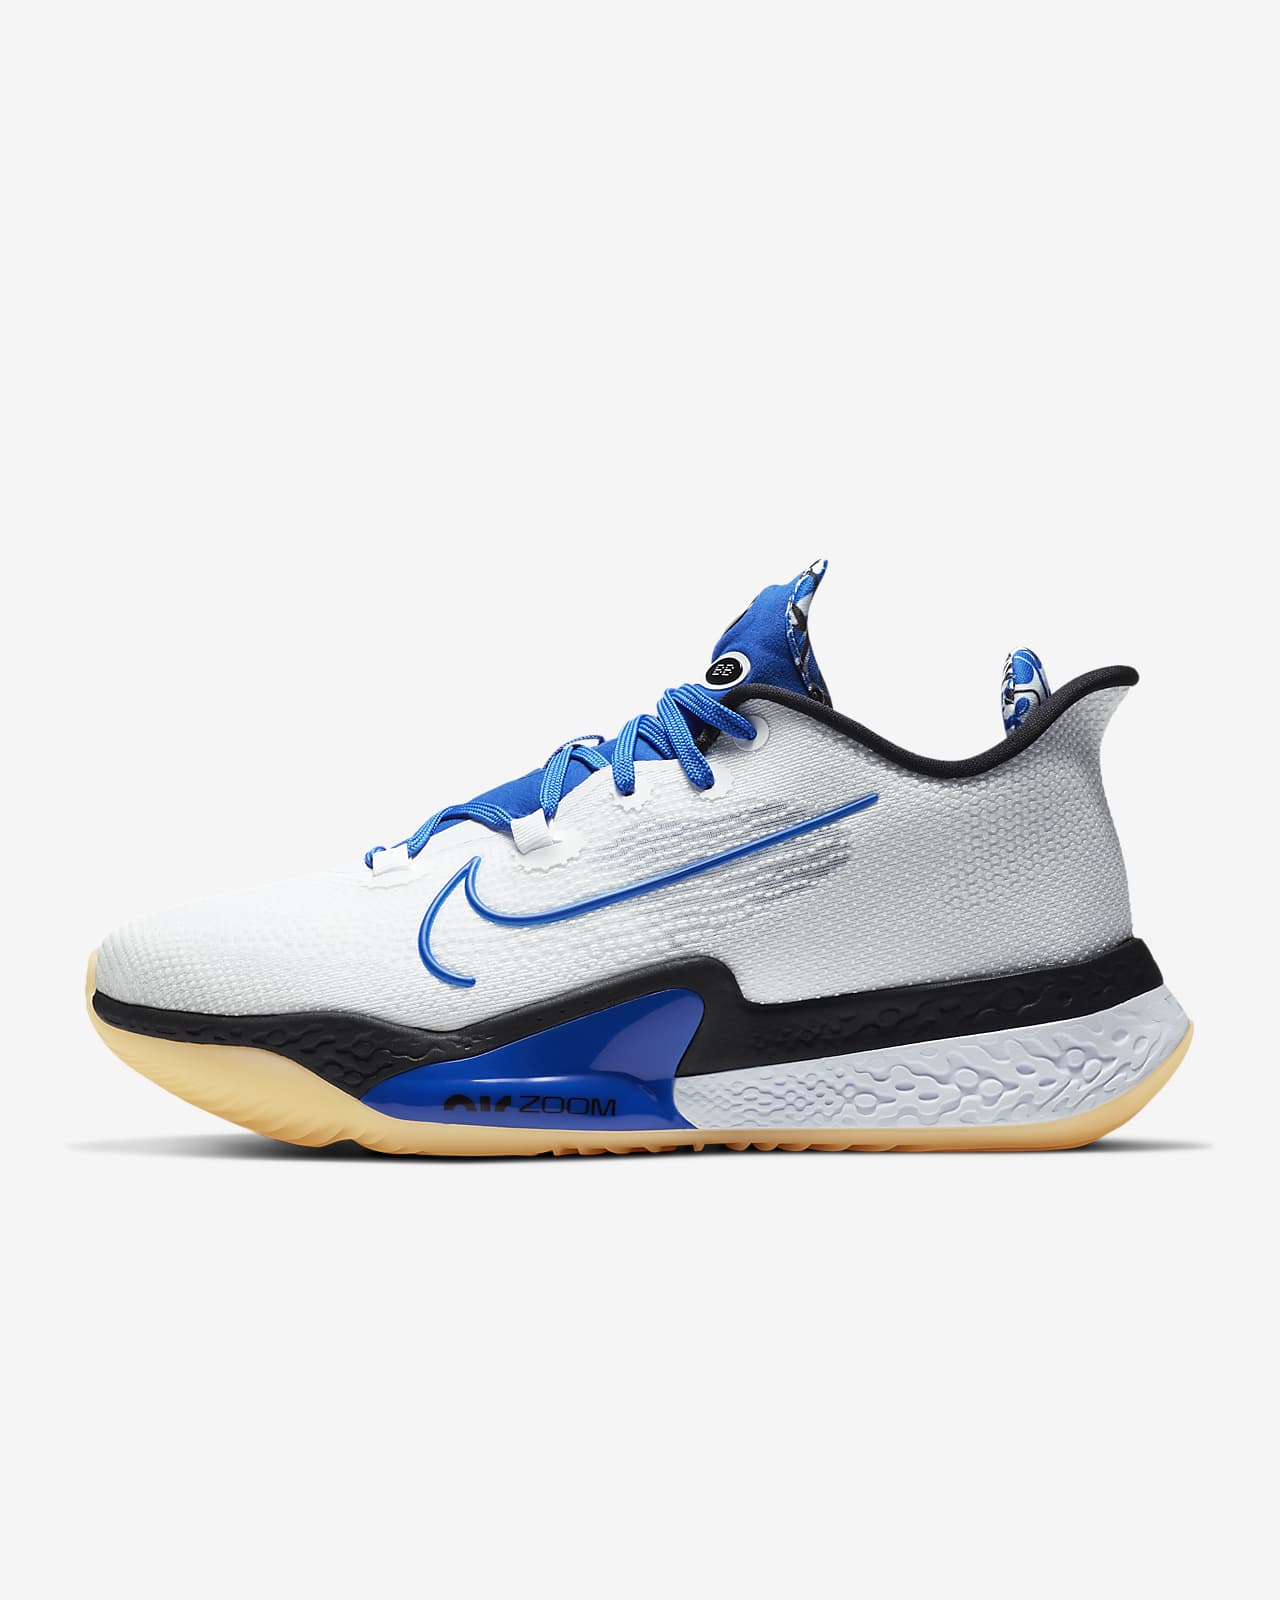 nike zoom low top basketball shoes